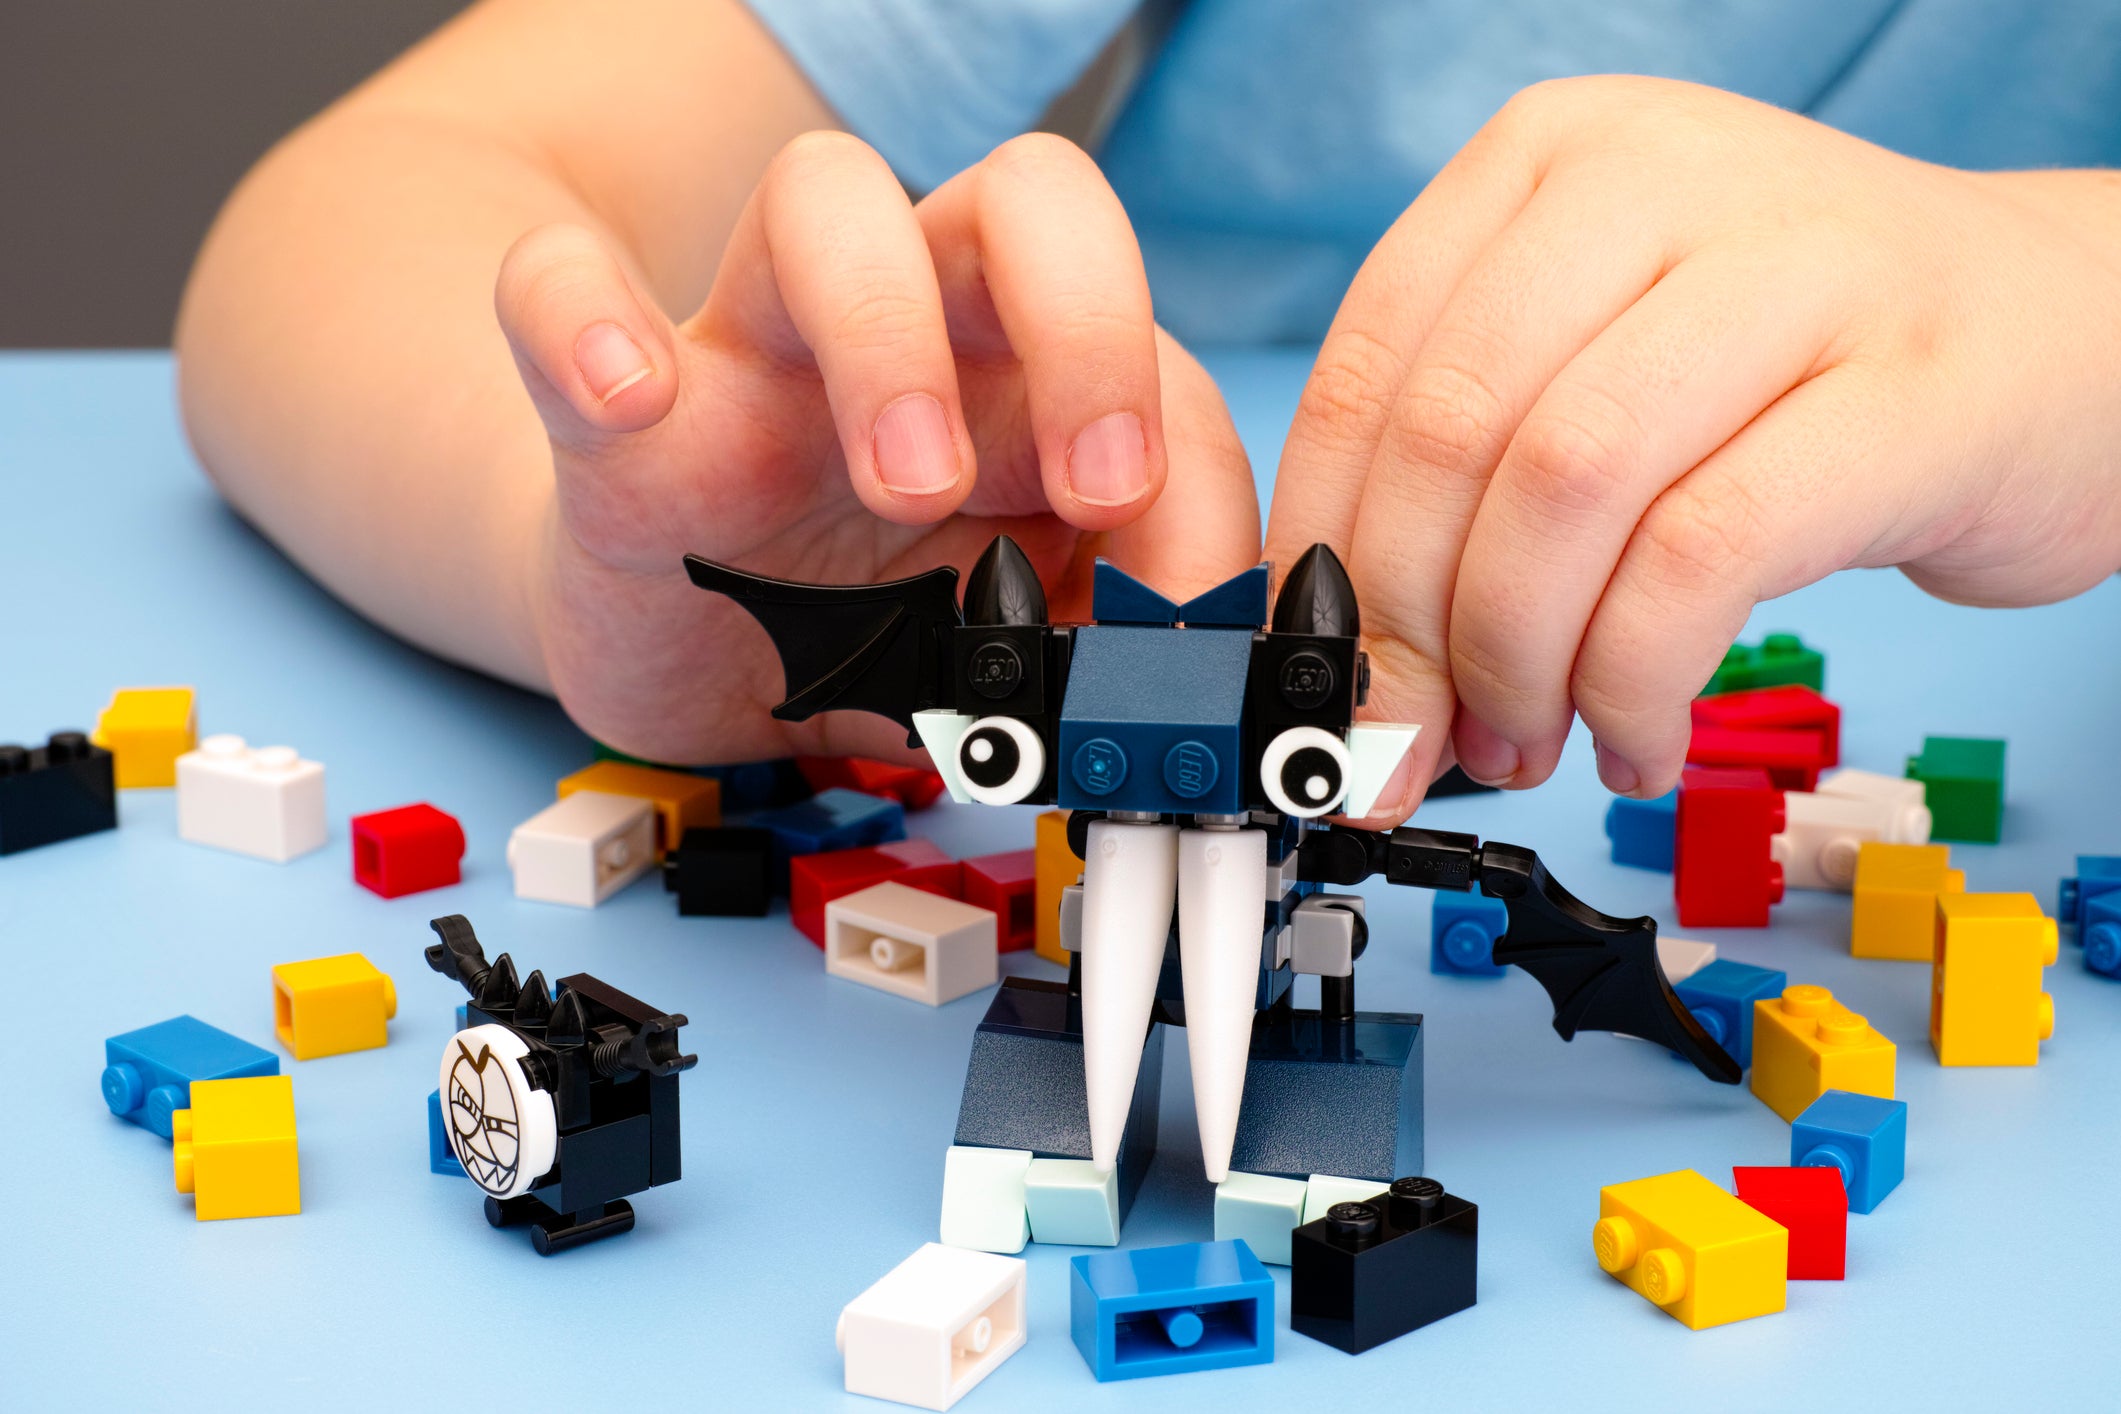 A new study by Lego polled nearly 7,000 parents and children across the world